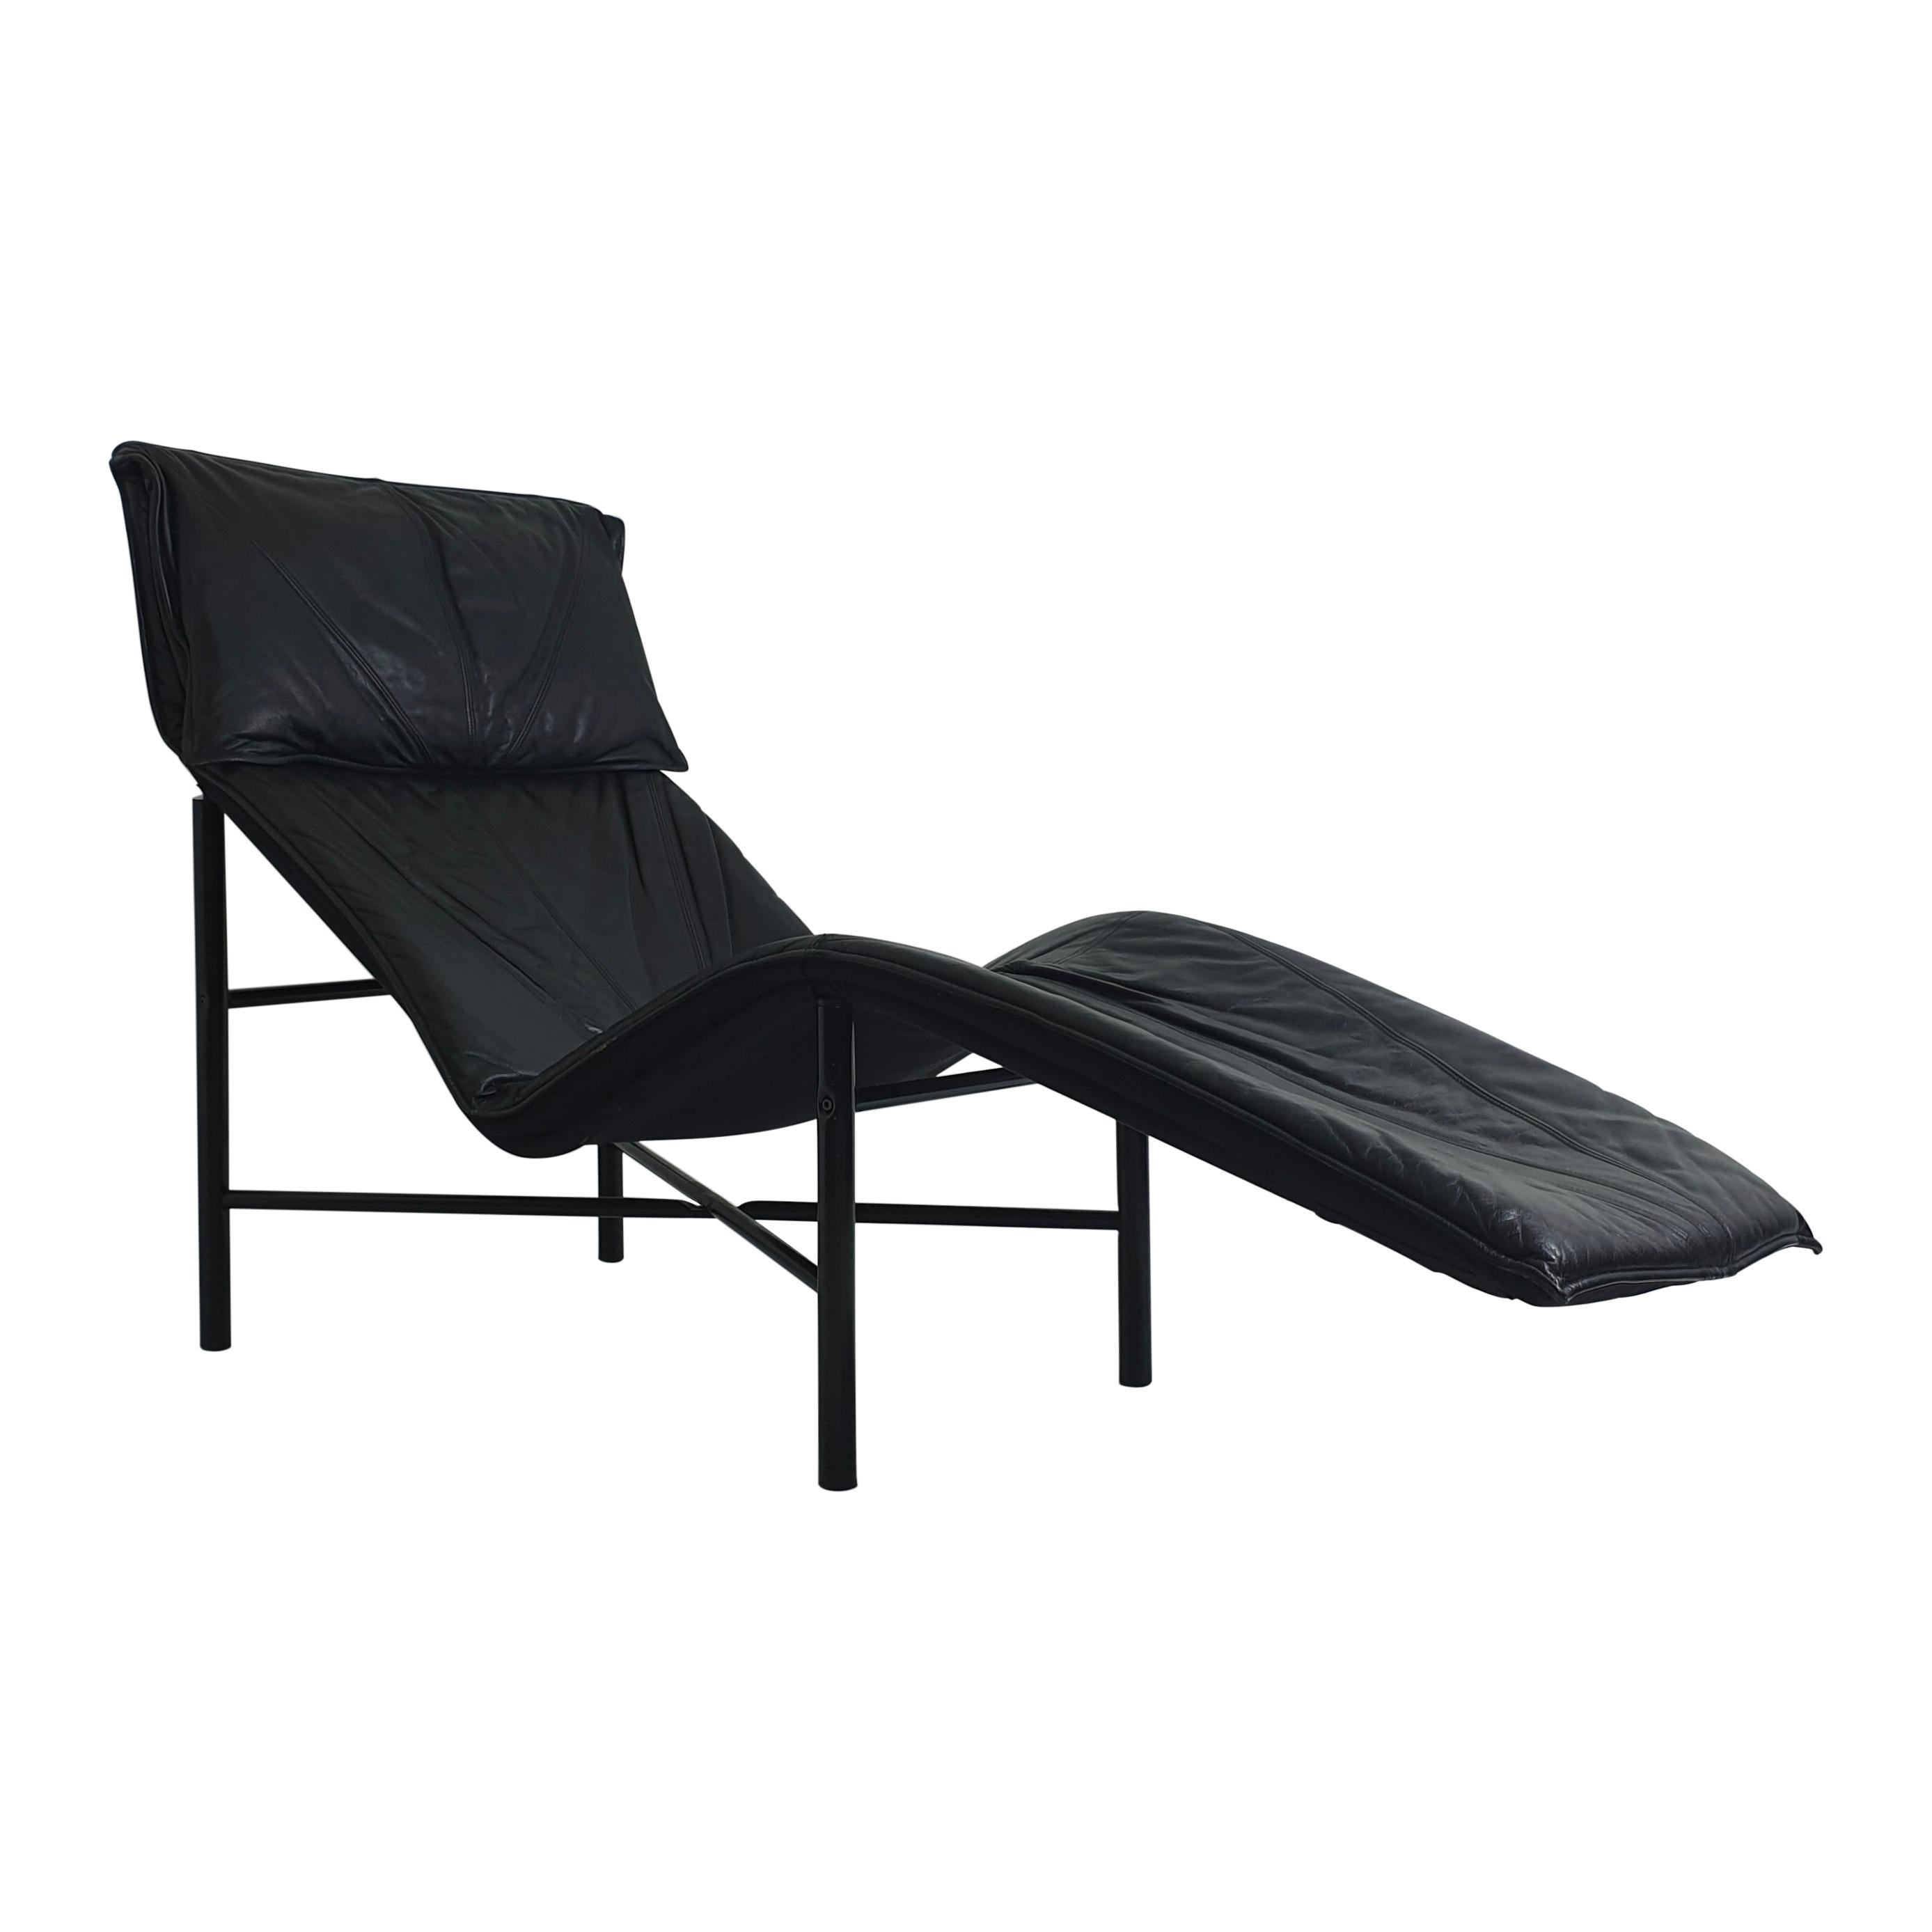 Black Leather 'Skye' Chaise by Tord Björklund for Ikea, circa 1980 For Sale